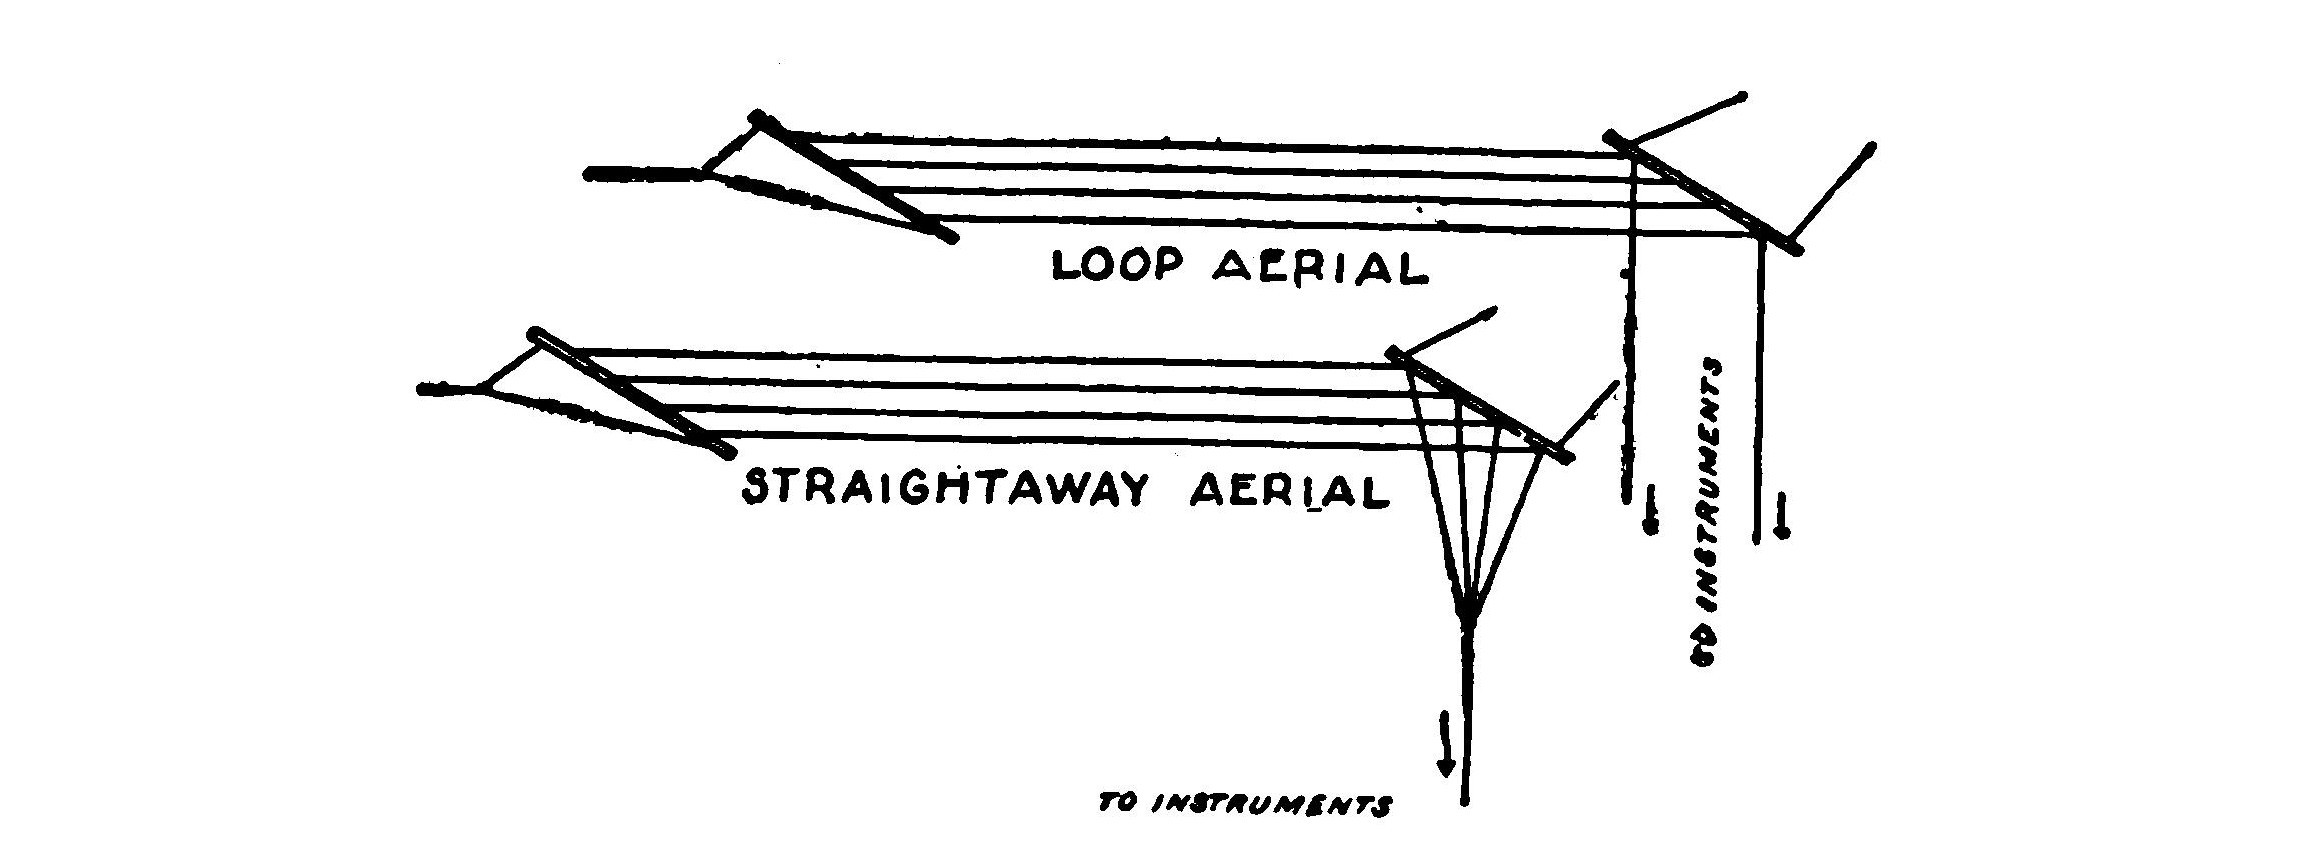 FIG. 23.—Diagram showing the difference between "loop" and "straightaway" aerials.